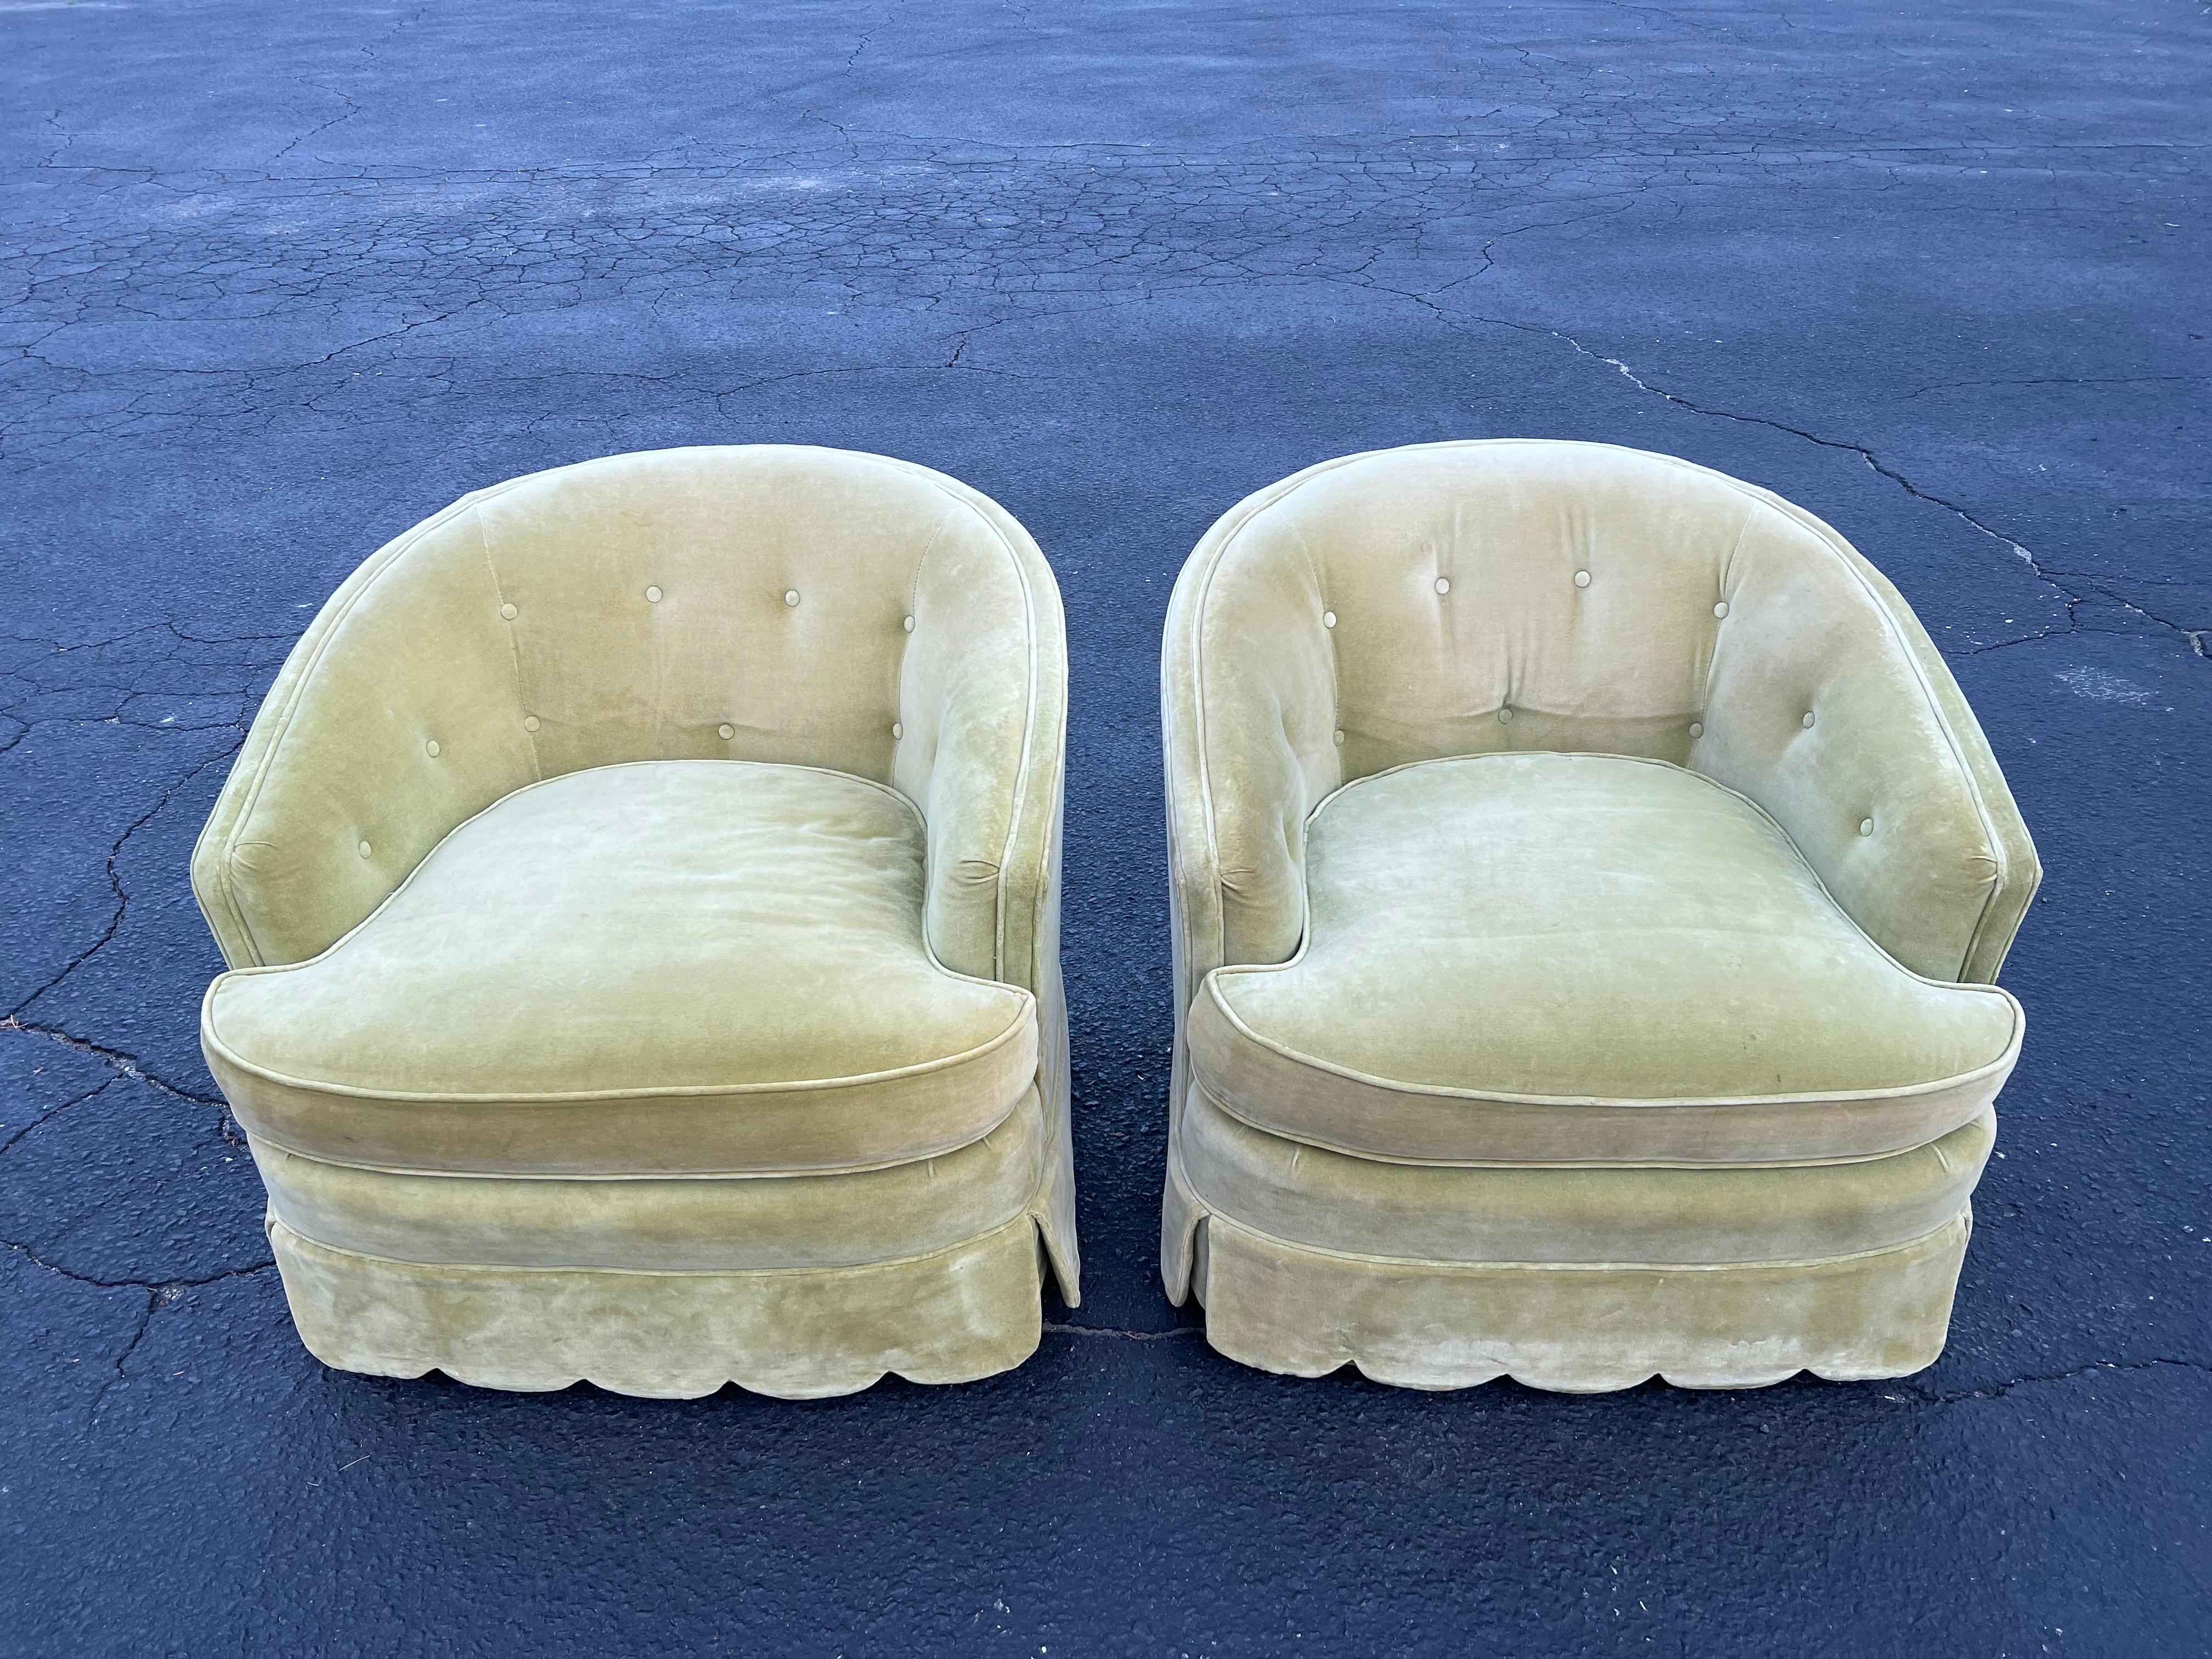 Pair of Vintage Velvet Henredon Swivel chairs. Soft sage green velvet upholstery with some button accents .Topped off with an amazing awning skirted base. Very Dorothy Draper. Heavy solid construction to these amazing swivel chairs. perfect for a